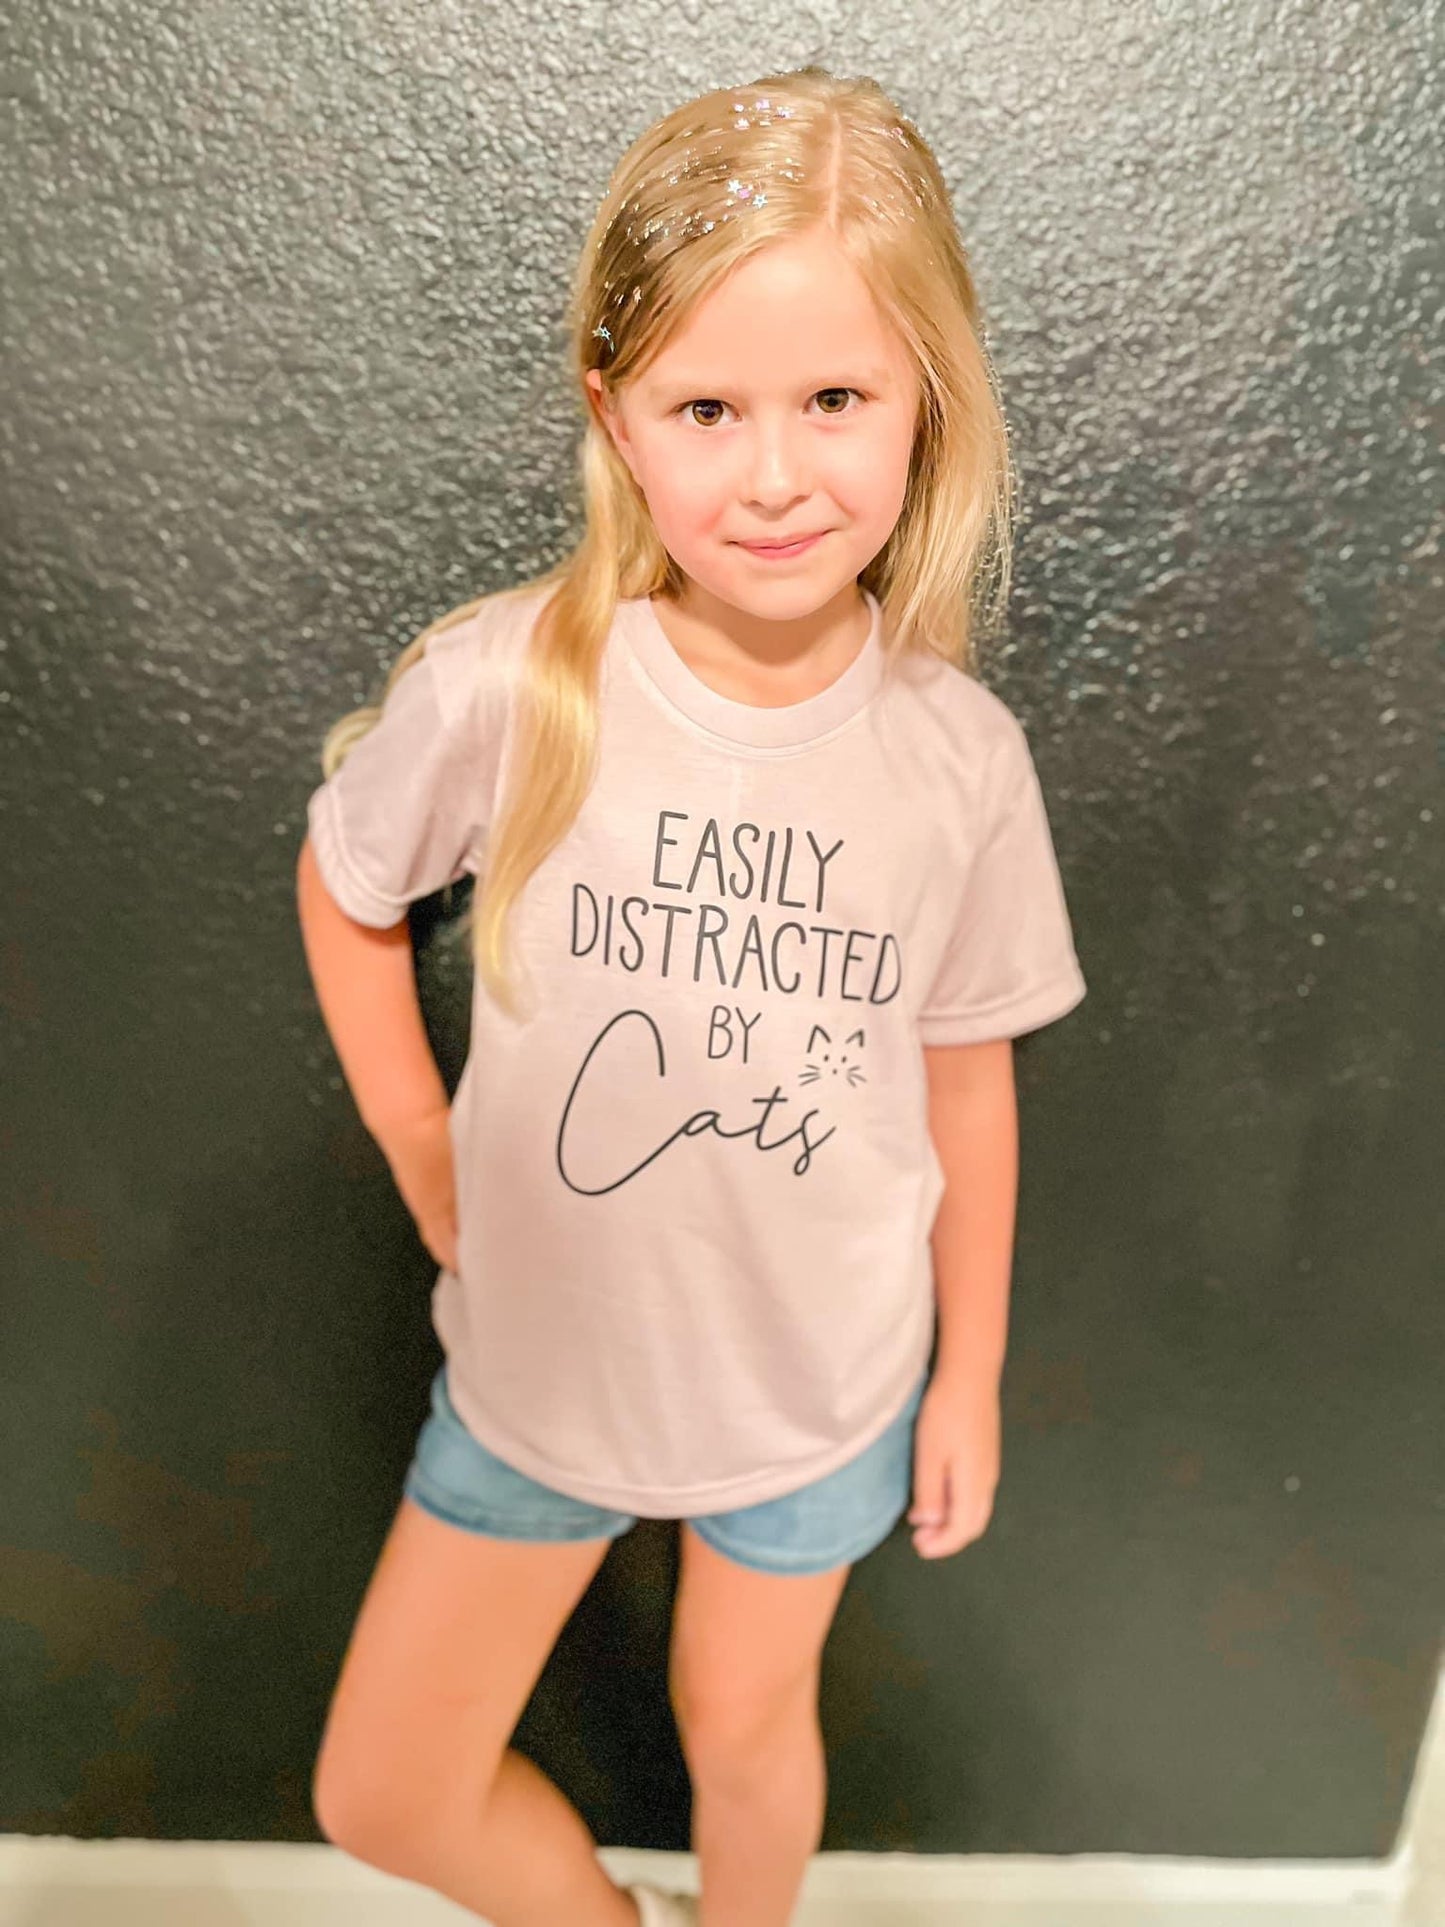 Easily Distracted by Cats Sublimation Shirt